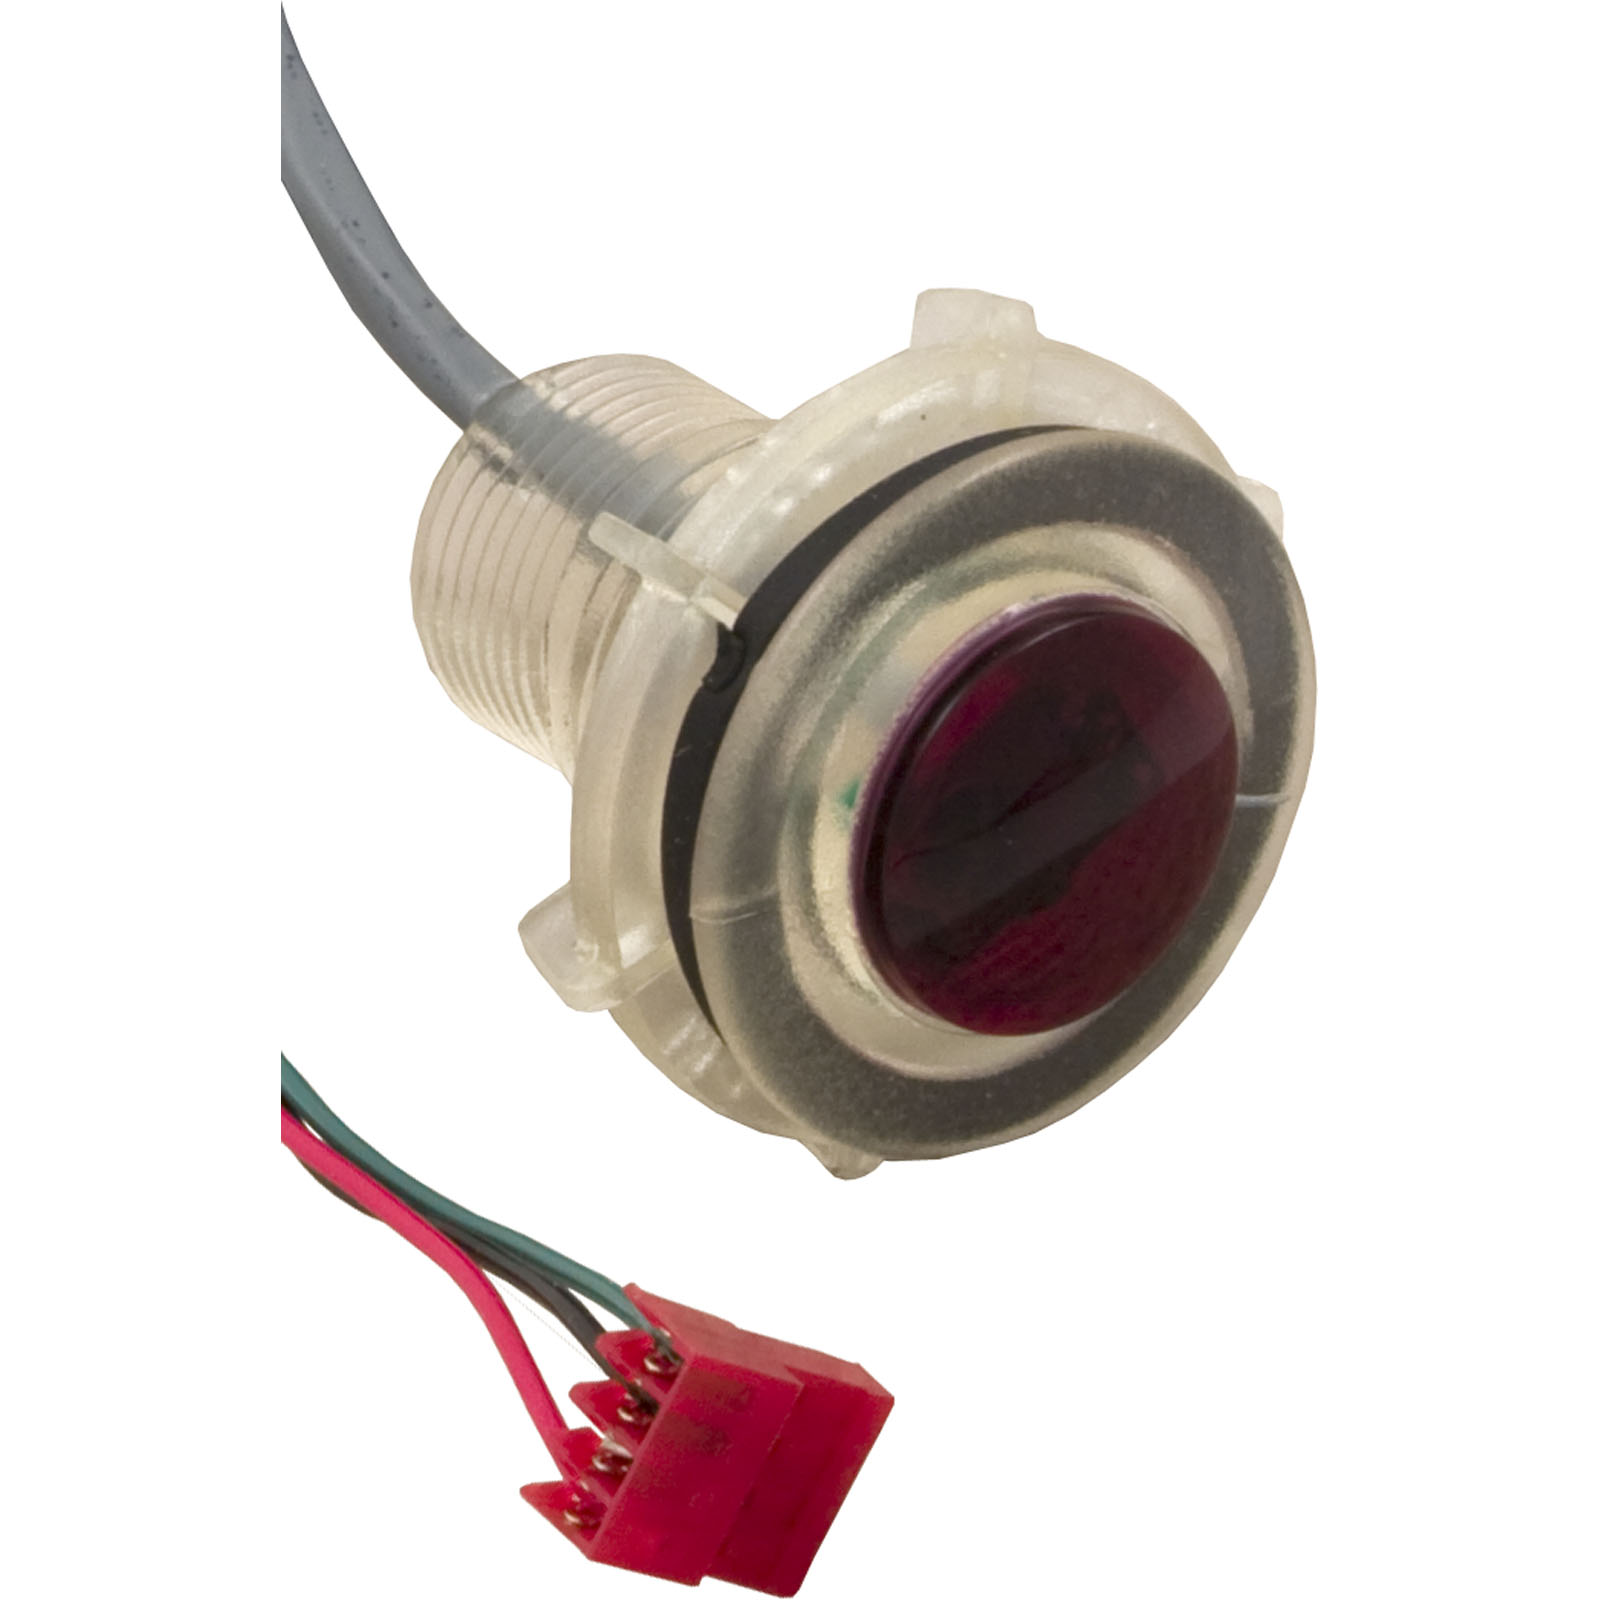 Picture of 34-0195-F Infra Red Sensor Hydro-Quip 8600 Series 25 foot Cord